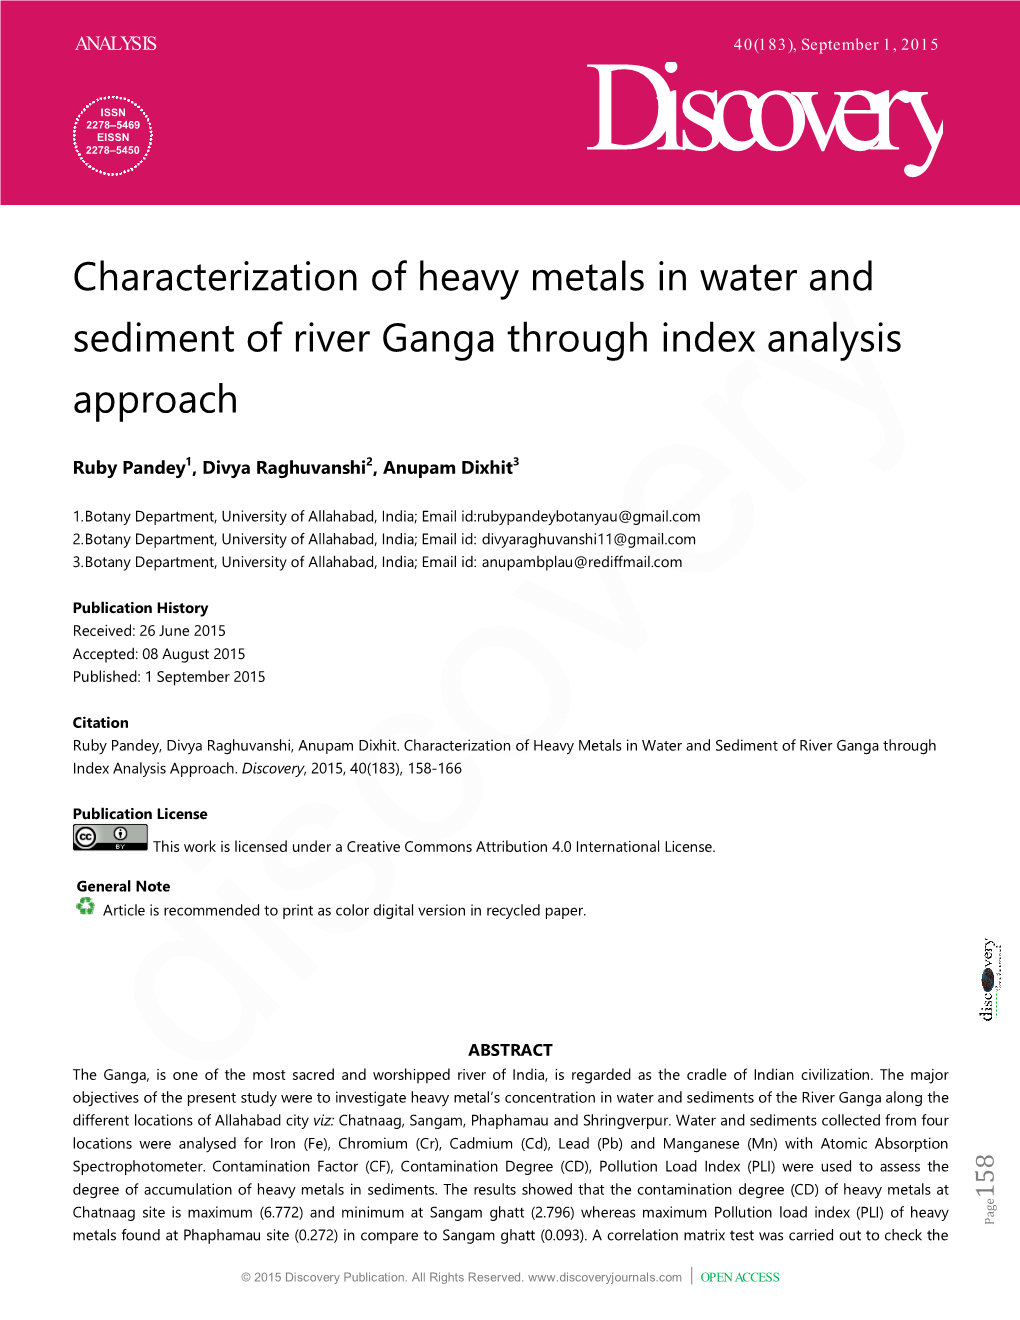 Characterization of Heavy Metals in Water and Sediment of River Ganga Through Index Analysis Approach